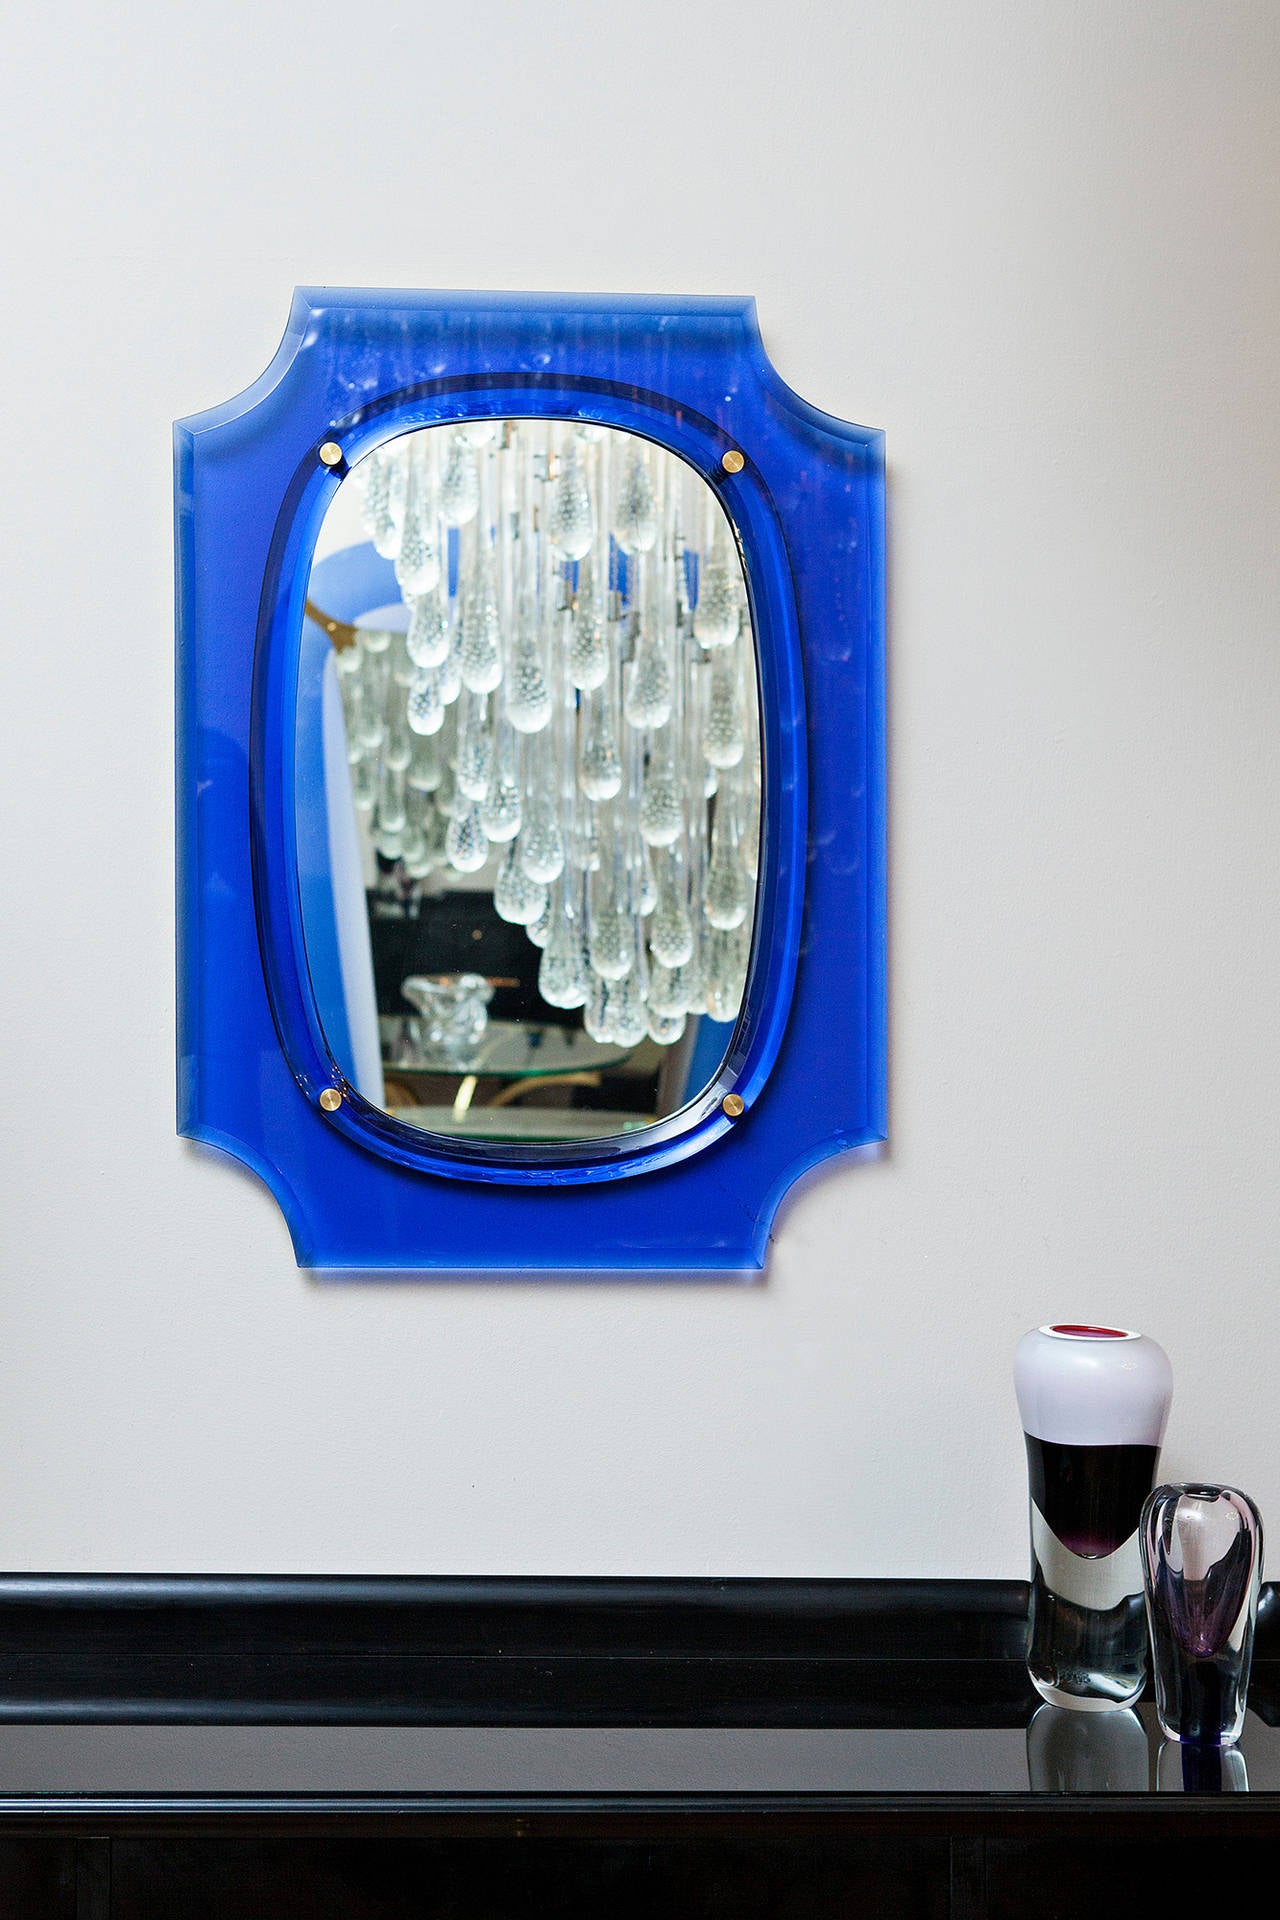 Elegant Wall mirror by Cristal Art, Italy circa 1970, blue shaped glass frame, mirror glass fixed with brass discs.
Height 80 cm, width 60 cm, depth 4 cm
Perfect condition!